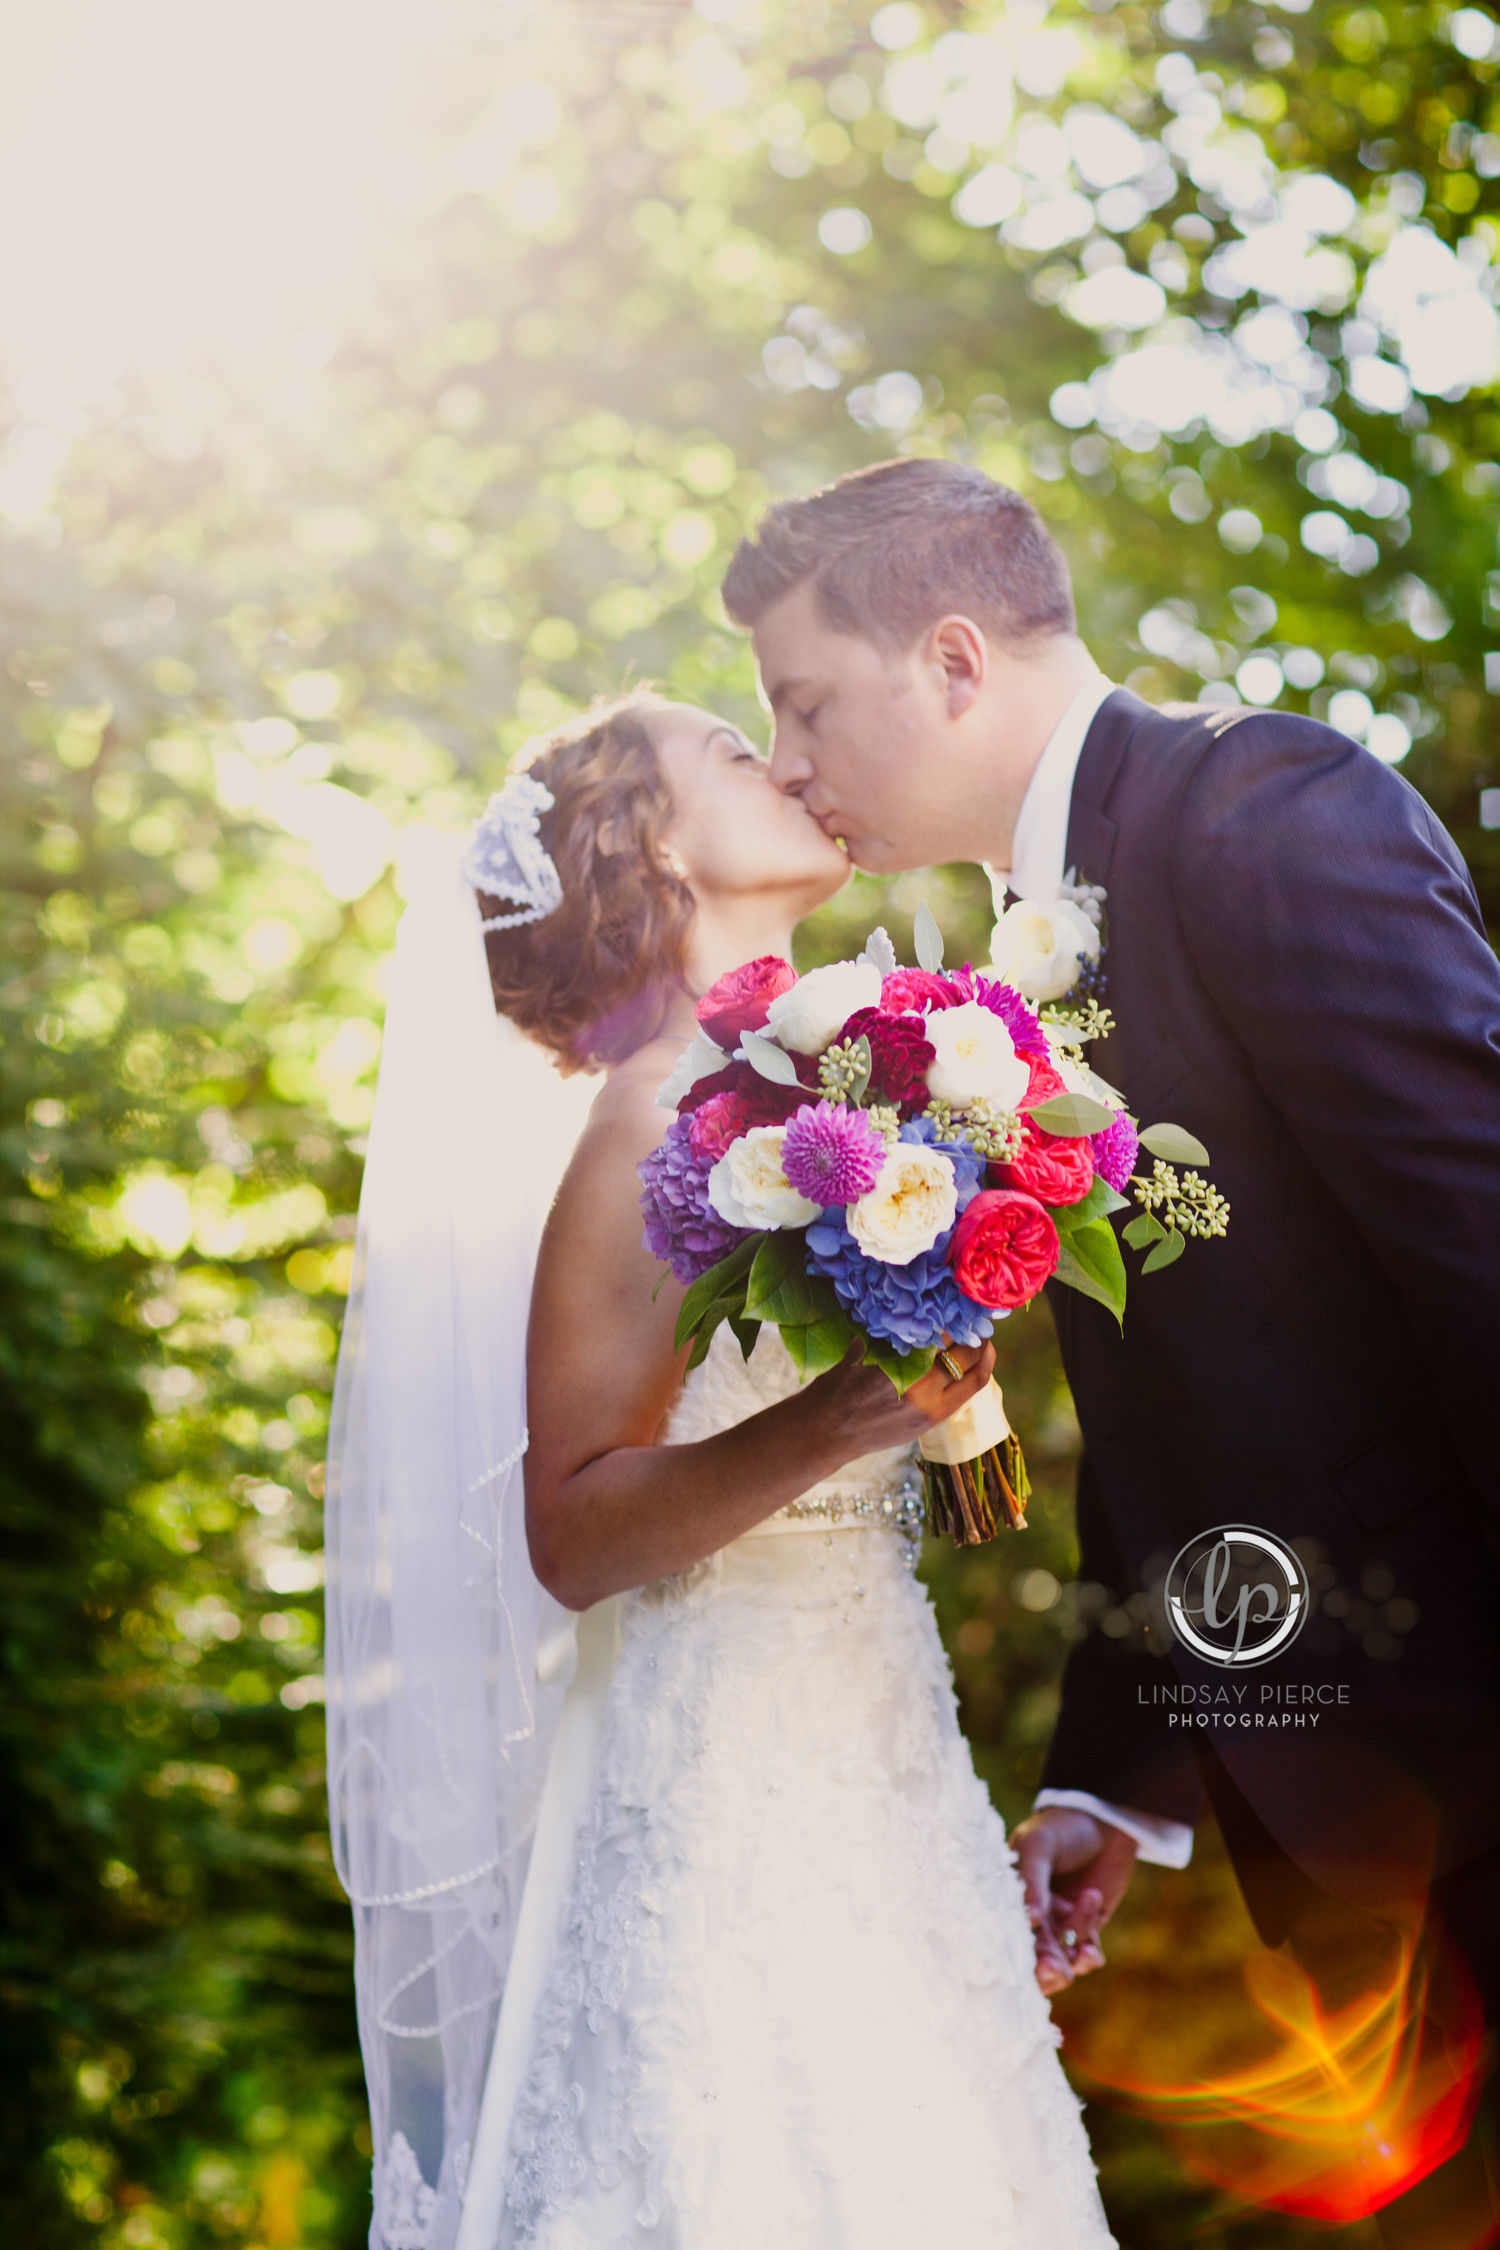 vintage wedding flowers - newly married couple with flower bouquet in hand